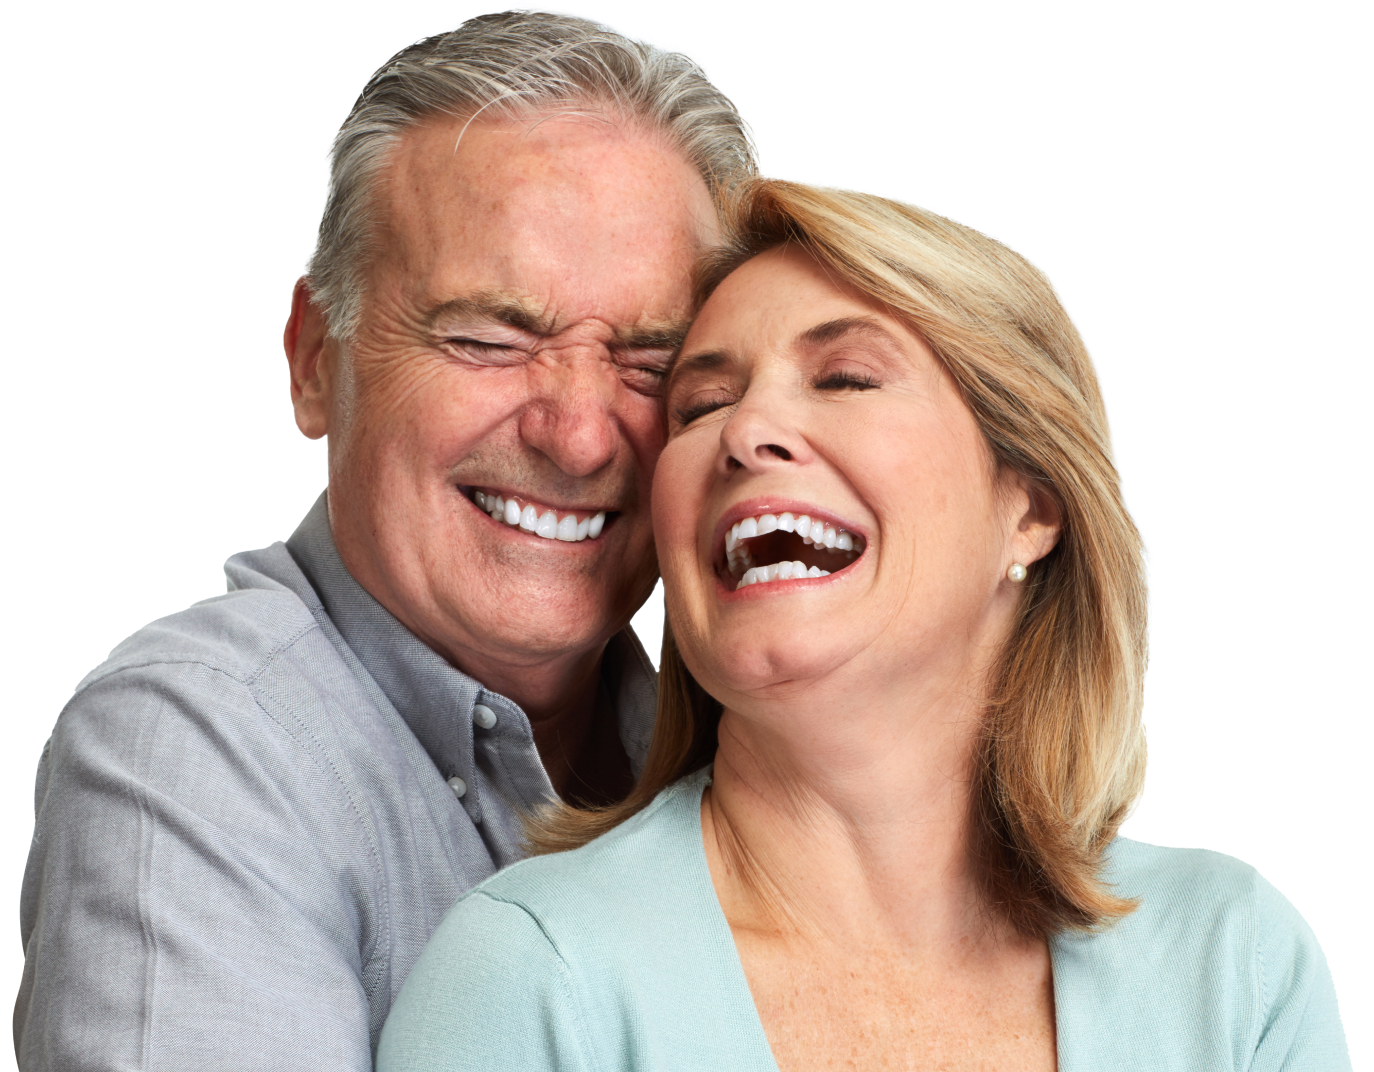 A man and a woman are laughing together with their eyes closed.